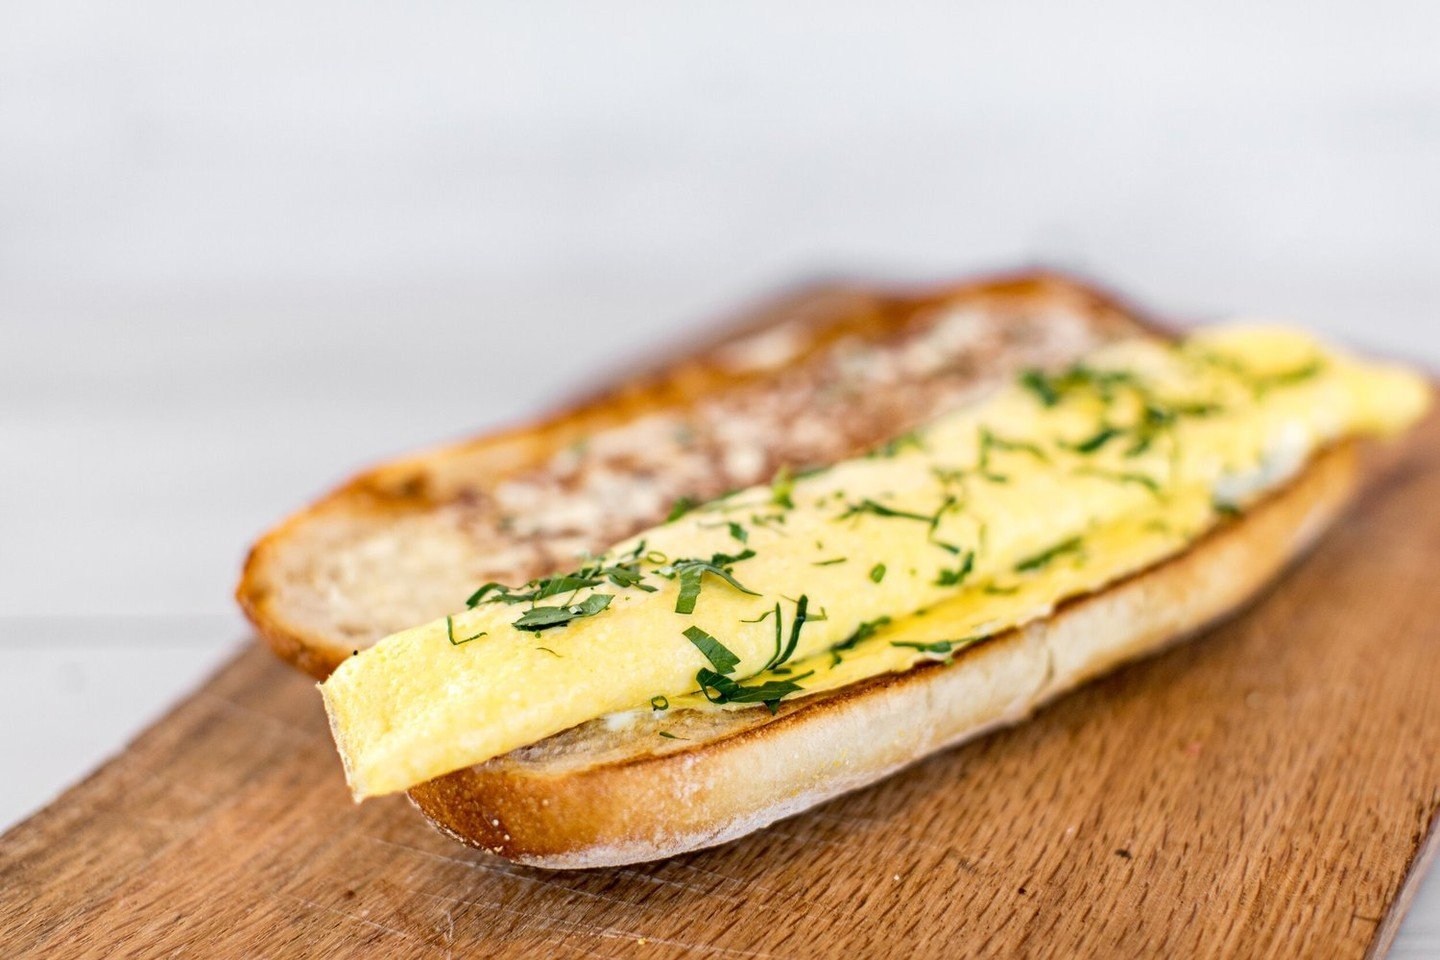 The French Omelet Baguette 🥖 Order in person or online!